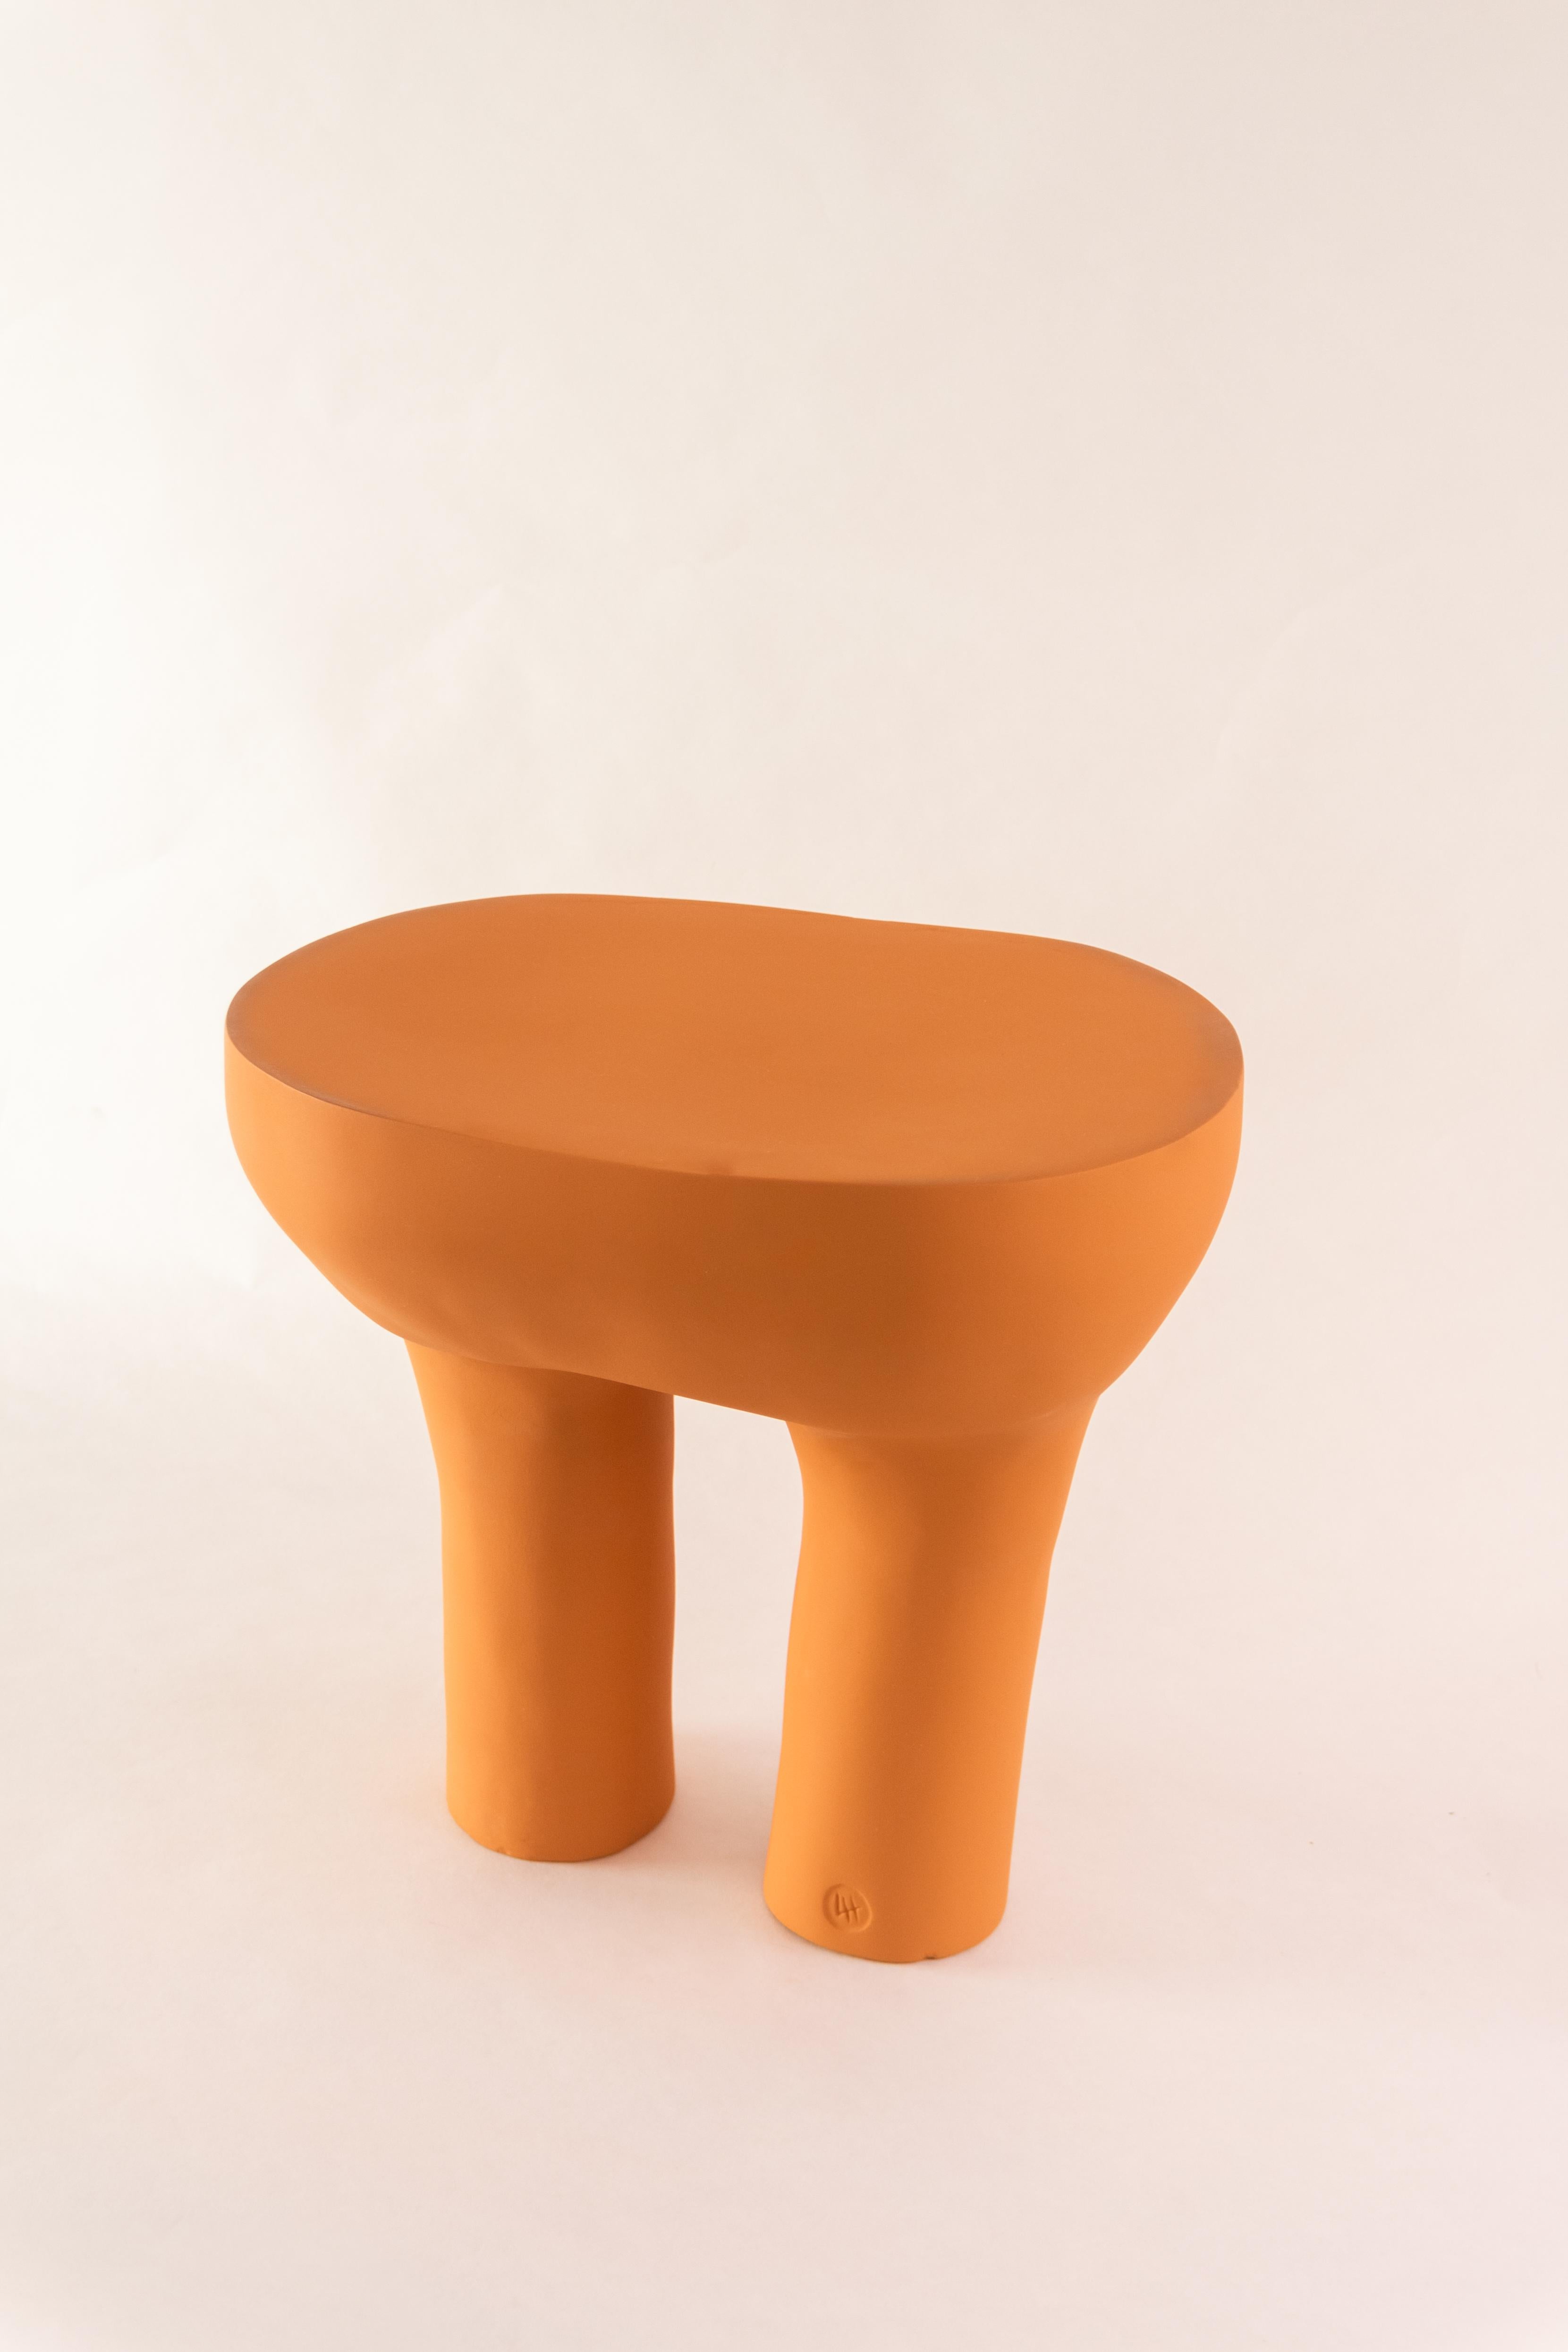 Post-Modern High Arca Side Table by Lucas Huillet